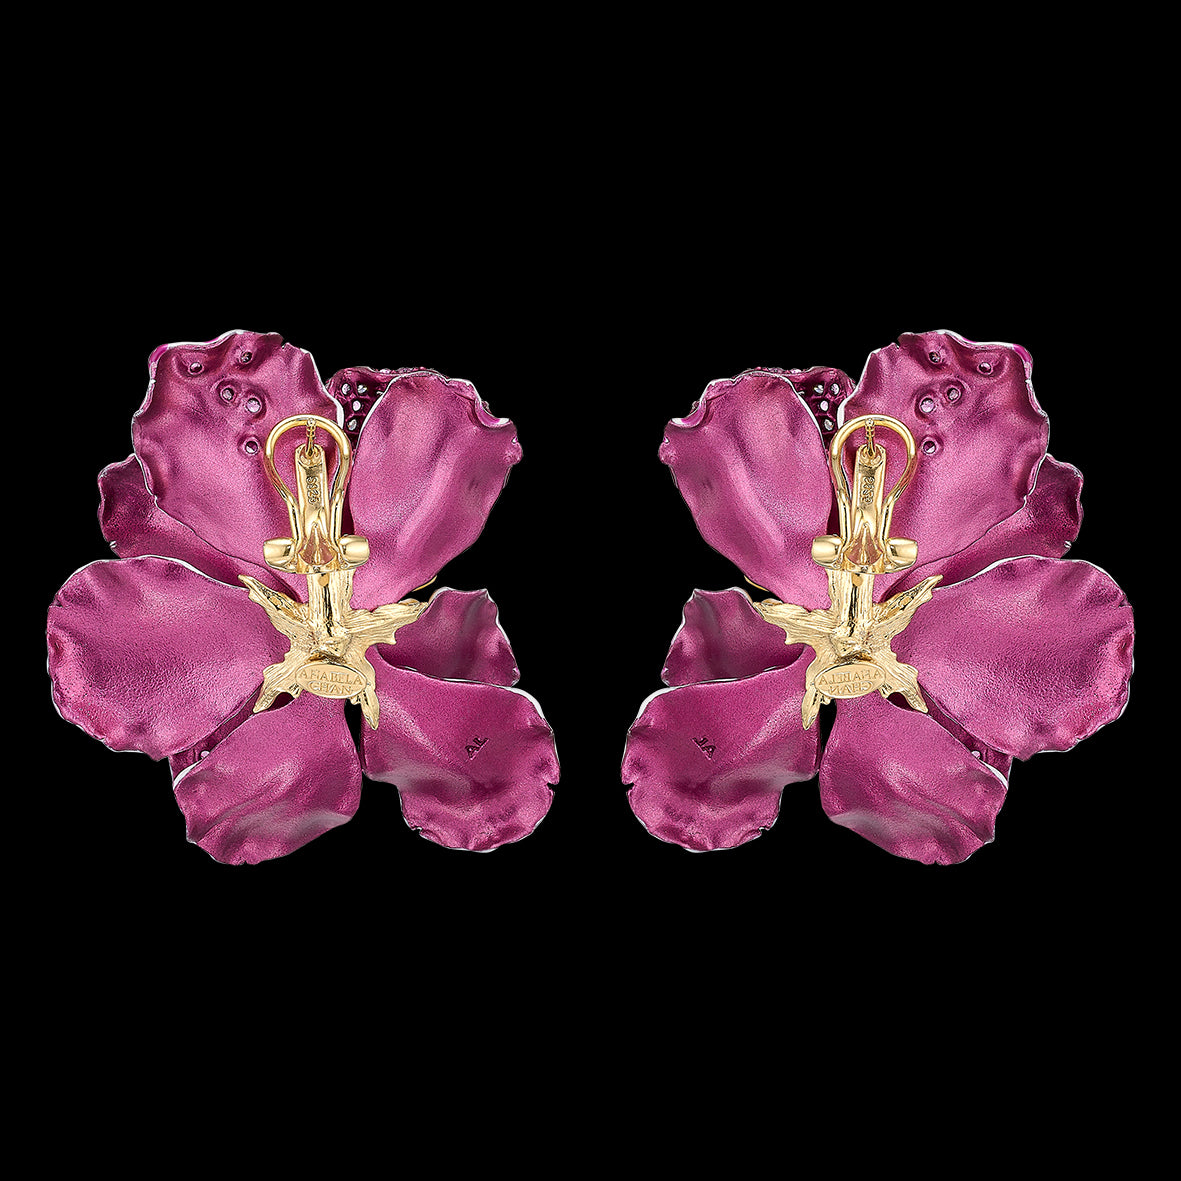 Orchid Poppy Earrings, Earrings, Anabela Chan Joaillerie - Fine jewelry with laboratory grown and created gemstones hand-crafted in the United Kingdom. Anabela Chan Joaillerie is the first fine jewellery brand in the world to champion laboratory-grown and created gemstones with high jewellery design, artisanal craftsmanship and a focus on ethical and sustainable innovations.